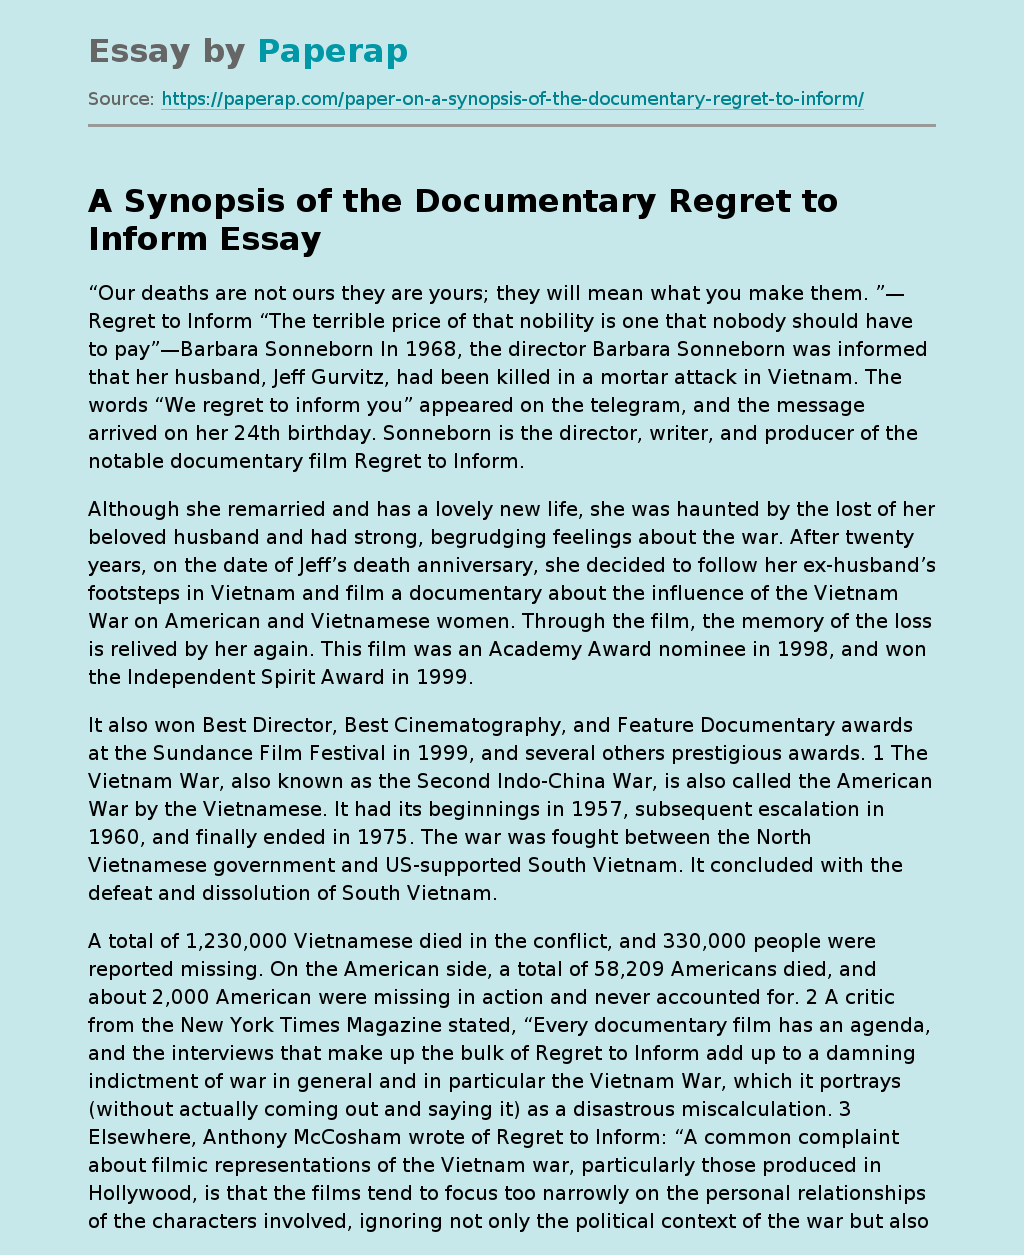 A Synopsis of the Documentary Regret to Inform